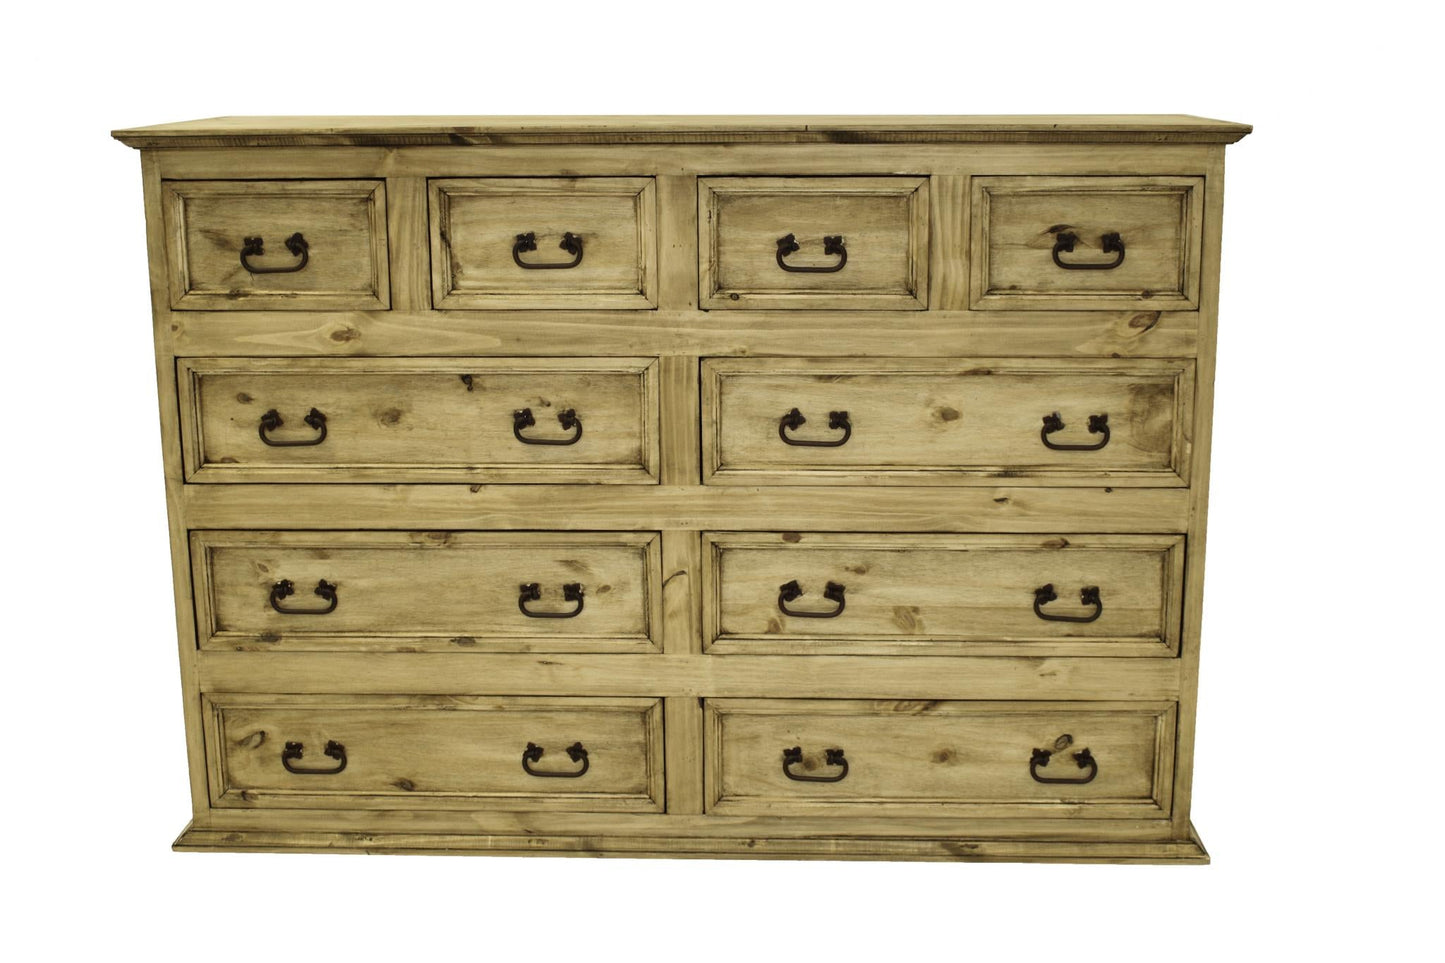 Rustic Promo Honey Pine Bedroom Set w/Star Option at Walker Mattress and Furniture Locations in Cedar Park and Belton TX.